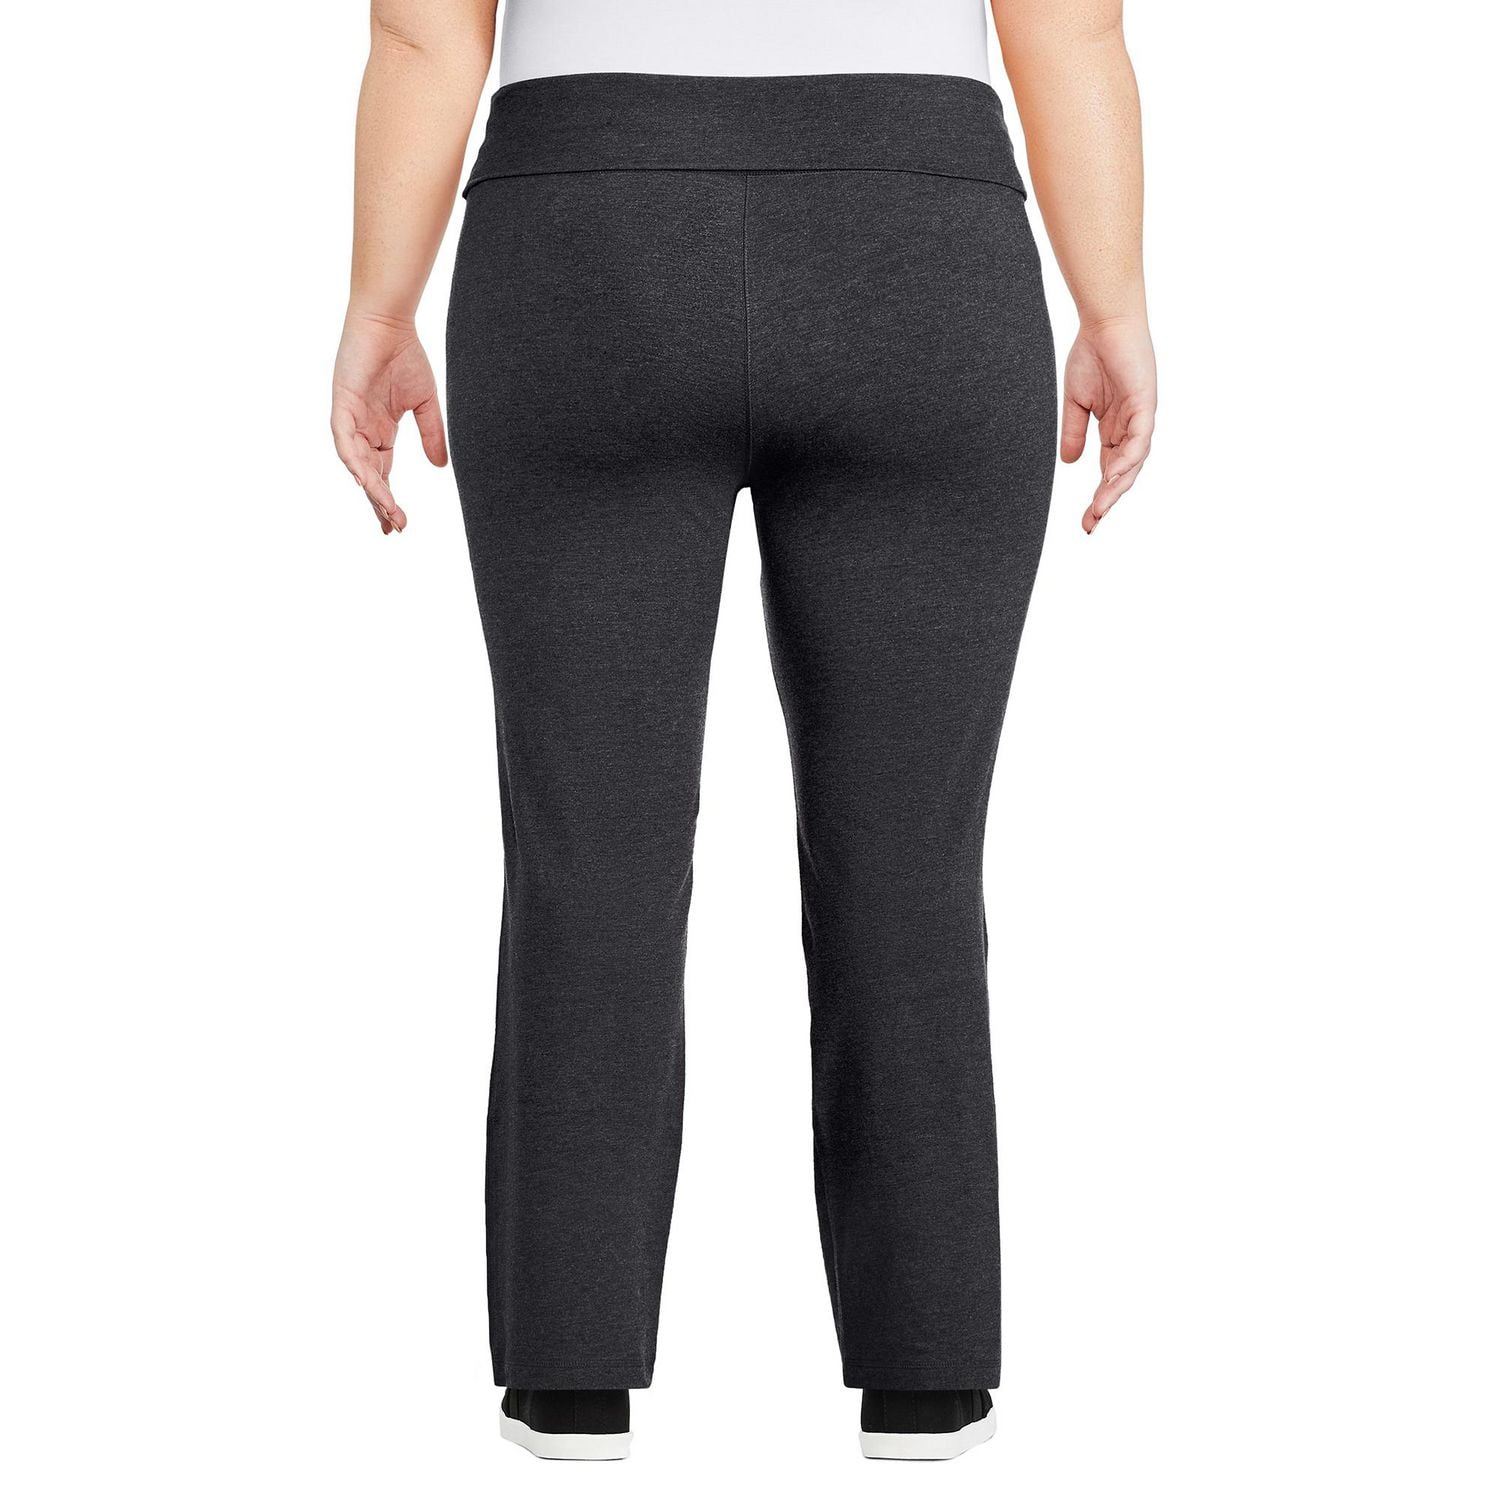 Lululemon Align High-Rise Wide-Leg Pant 31 Size 4 - $125 New With Tags -  From Jens